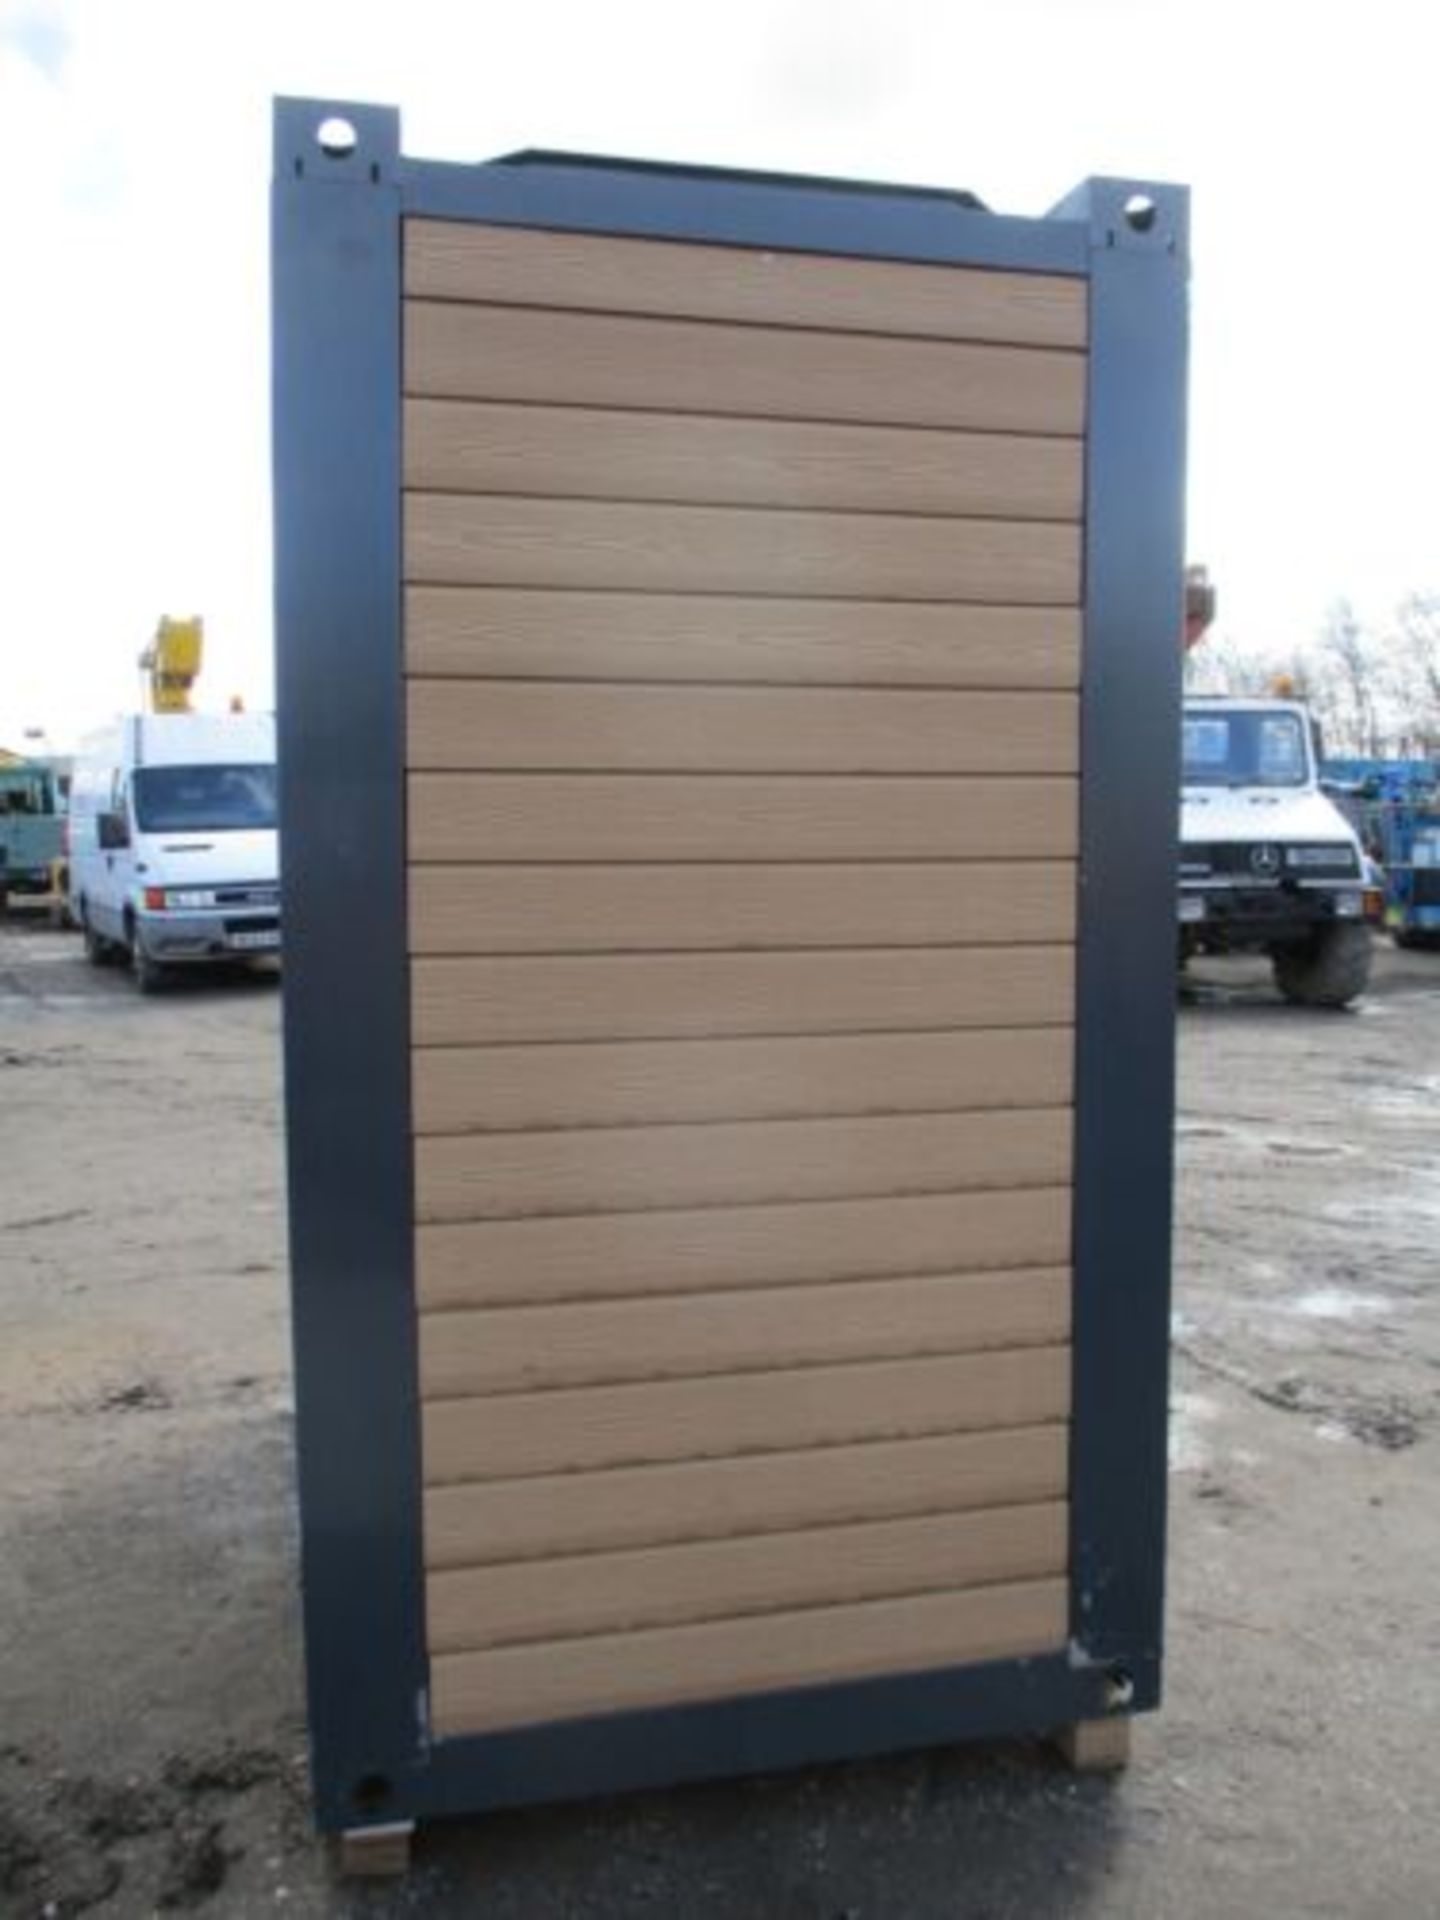 ADACON 2.1M X 1.35M DOUBLE TOILET BLOCK SECURE SHIPPING CONTAINER - Image 2 of 9